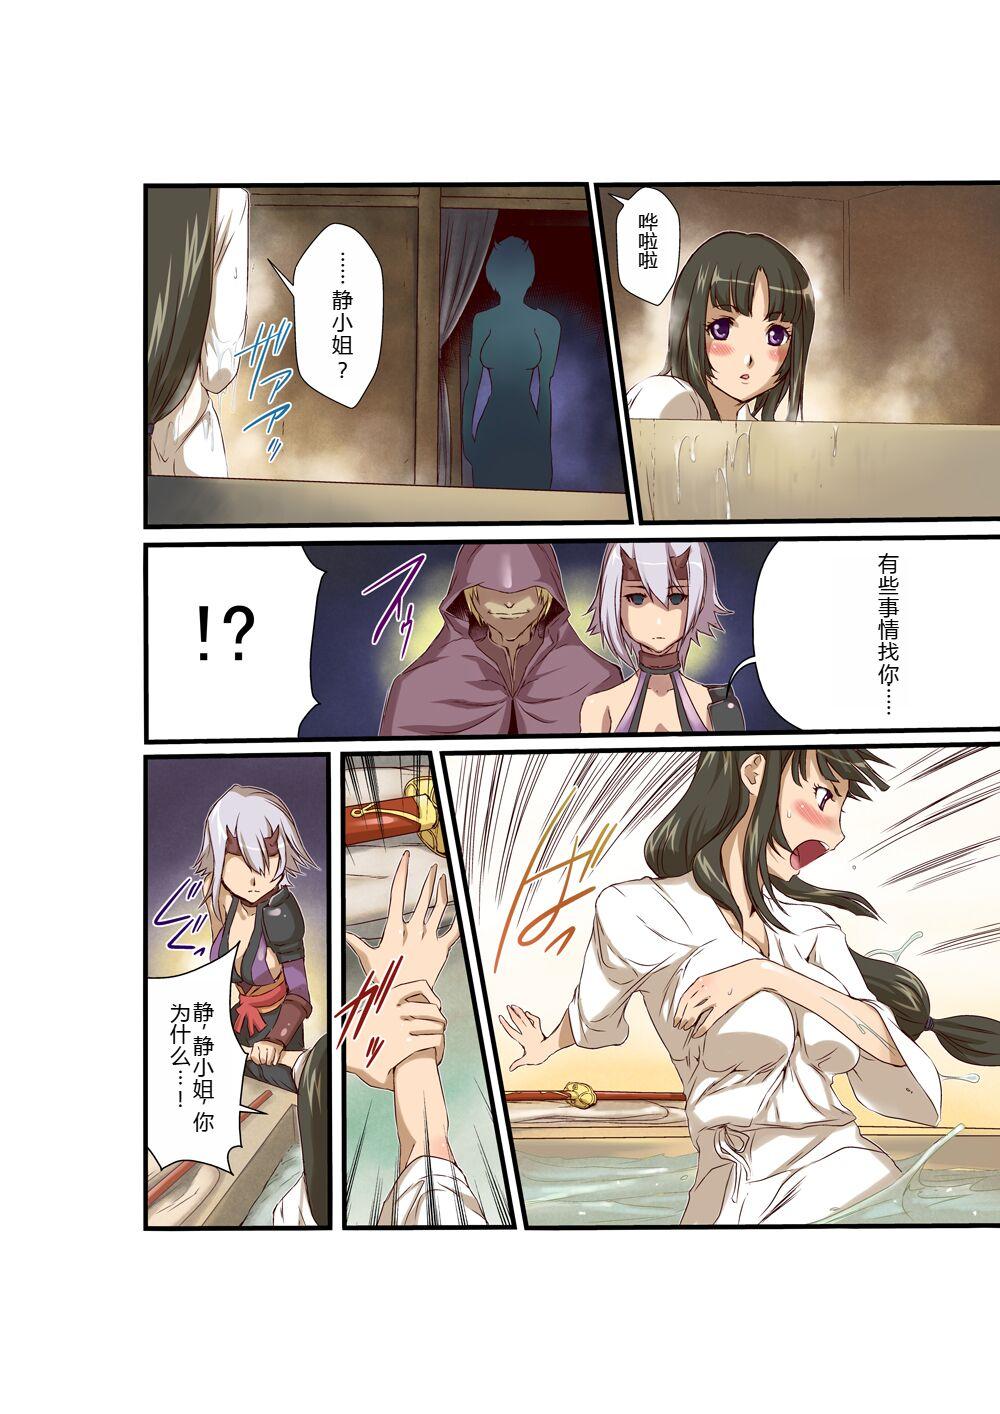 Fucking Queen's *lade Mind-control Manga - Queens blade Boquete - Page 6